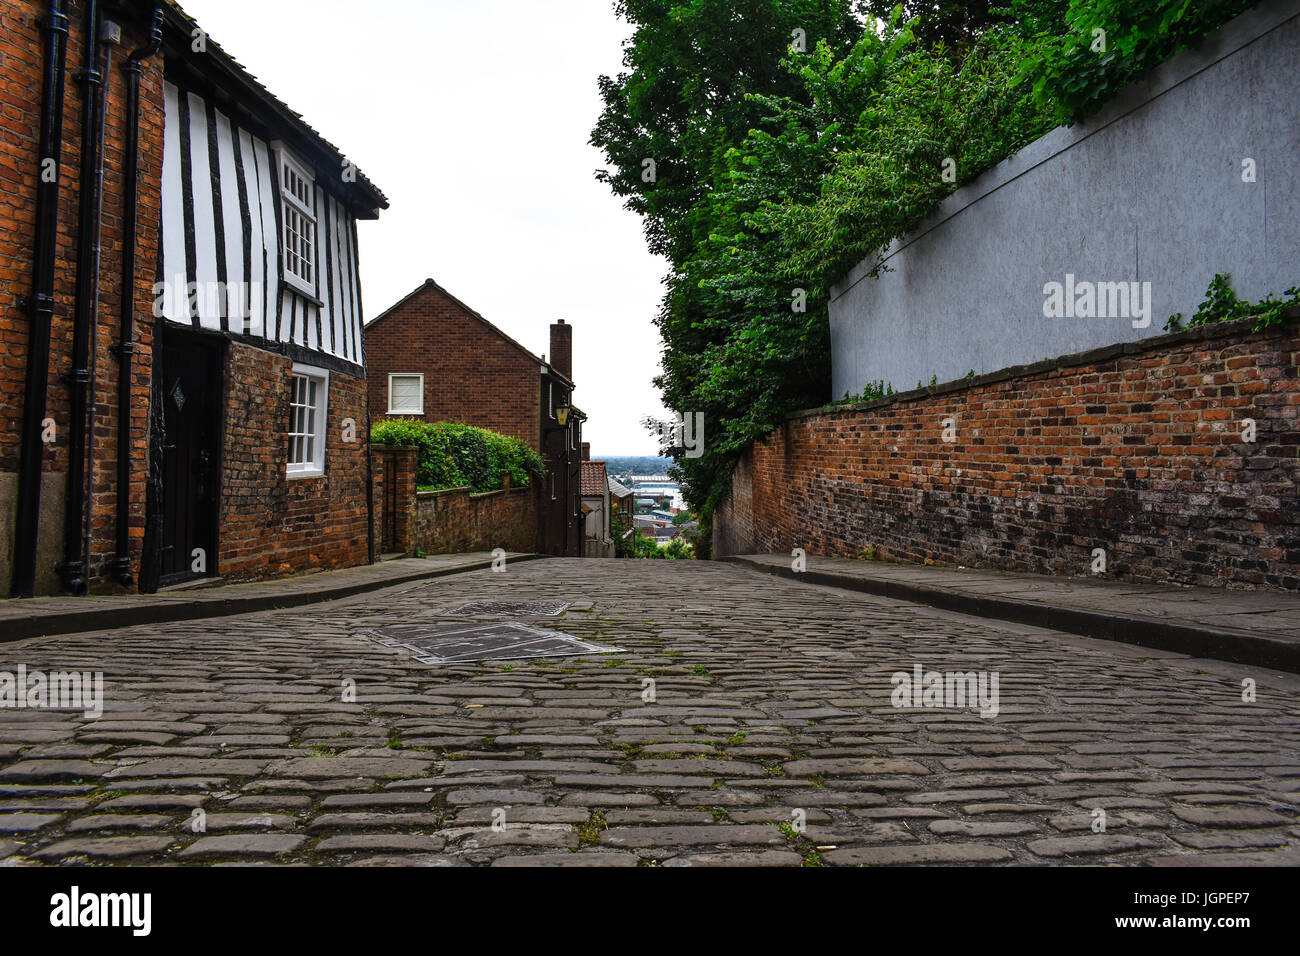 Top of the steep hill in Lincoln, looking back down into the town down a old brick road with old buildings Stock Photo